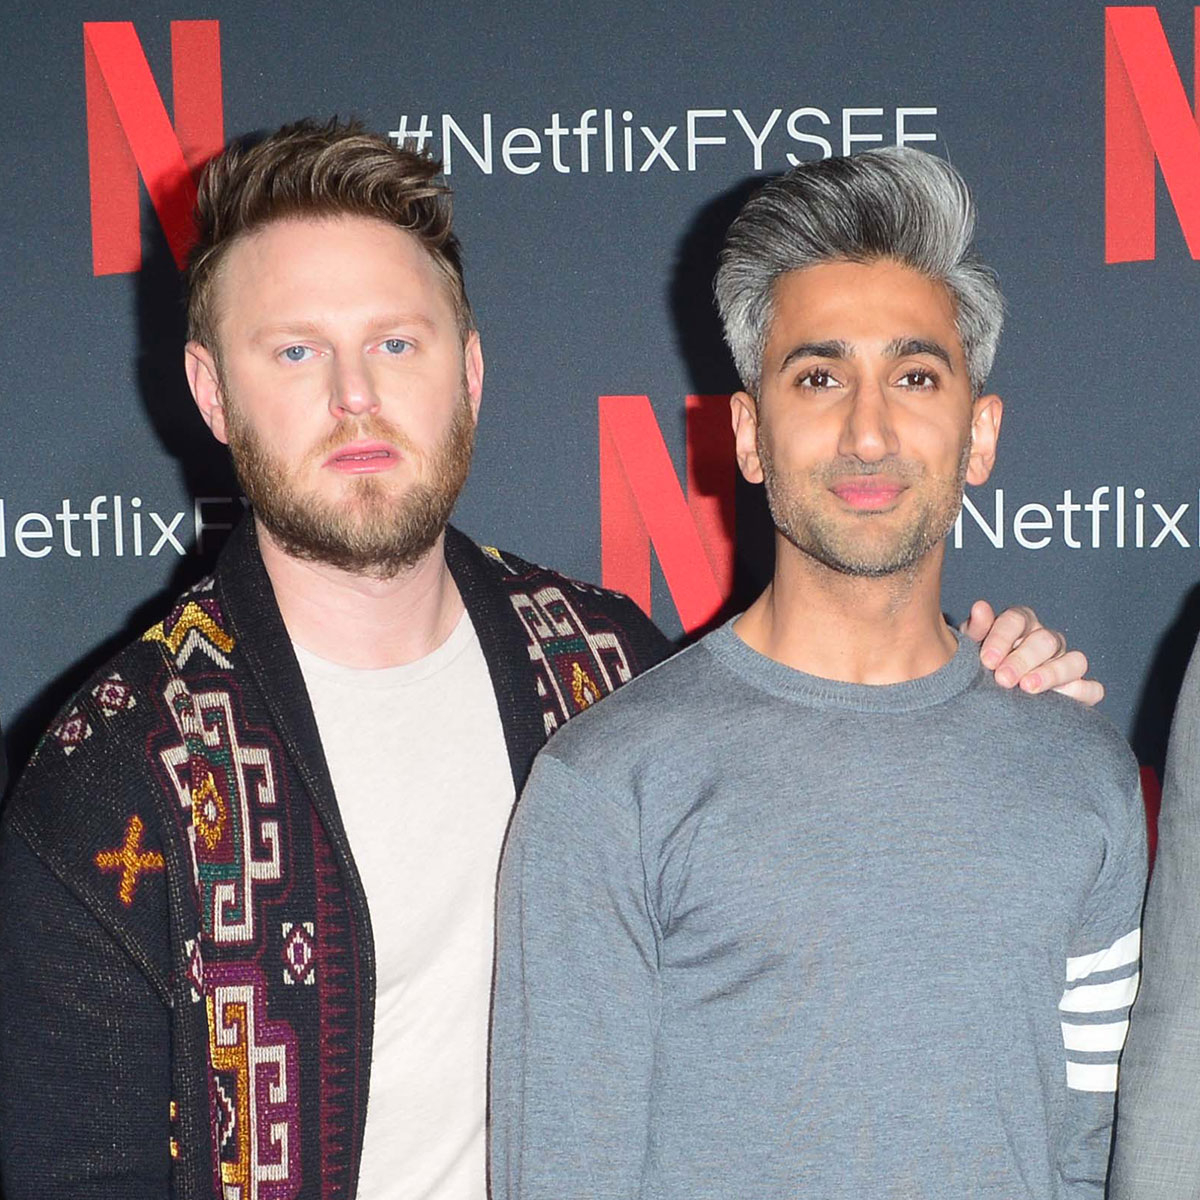 Tan France denies allegations of campaigning to replace Bobby Berk on Queer Eye